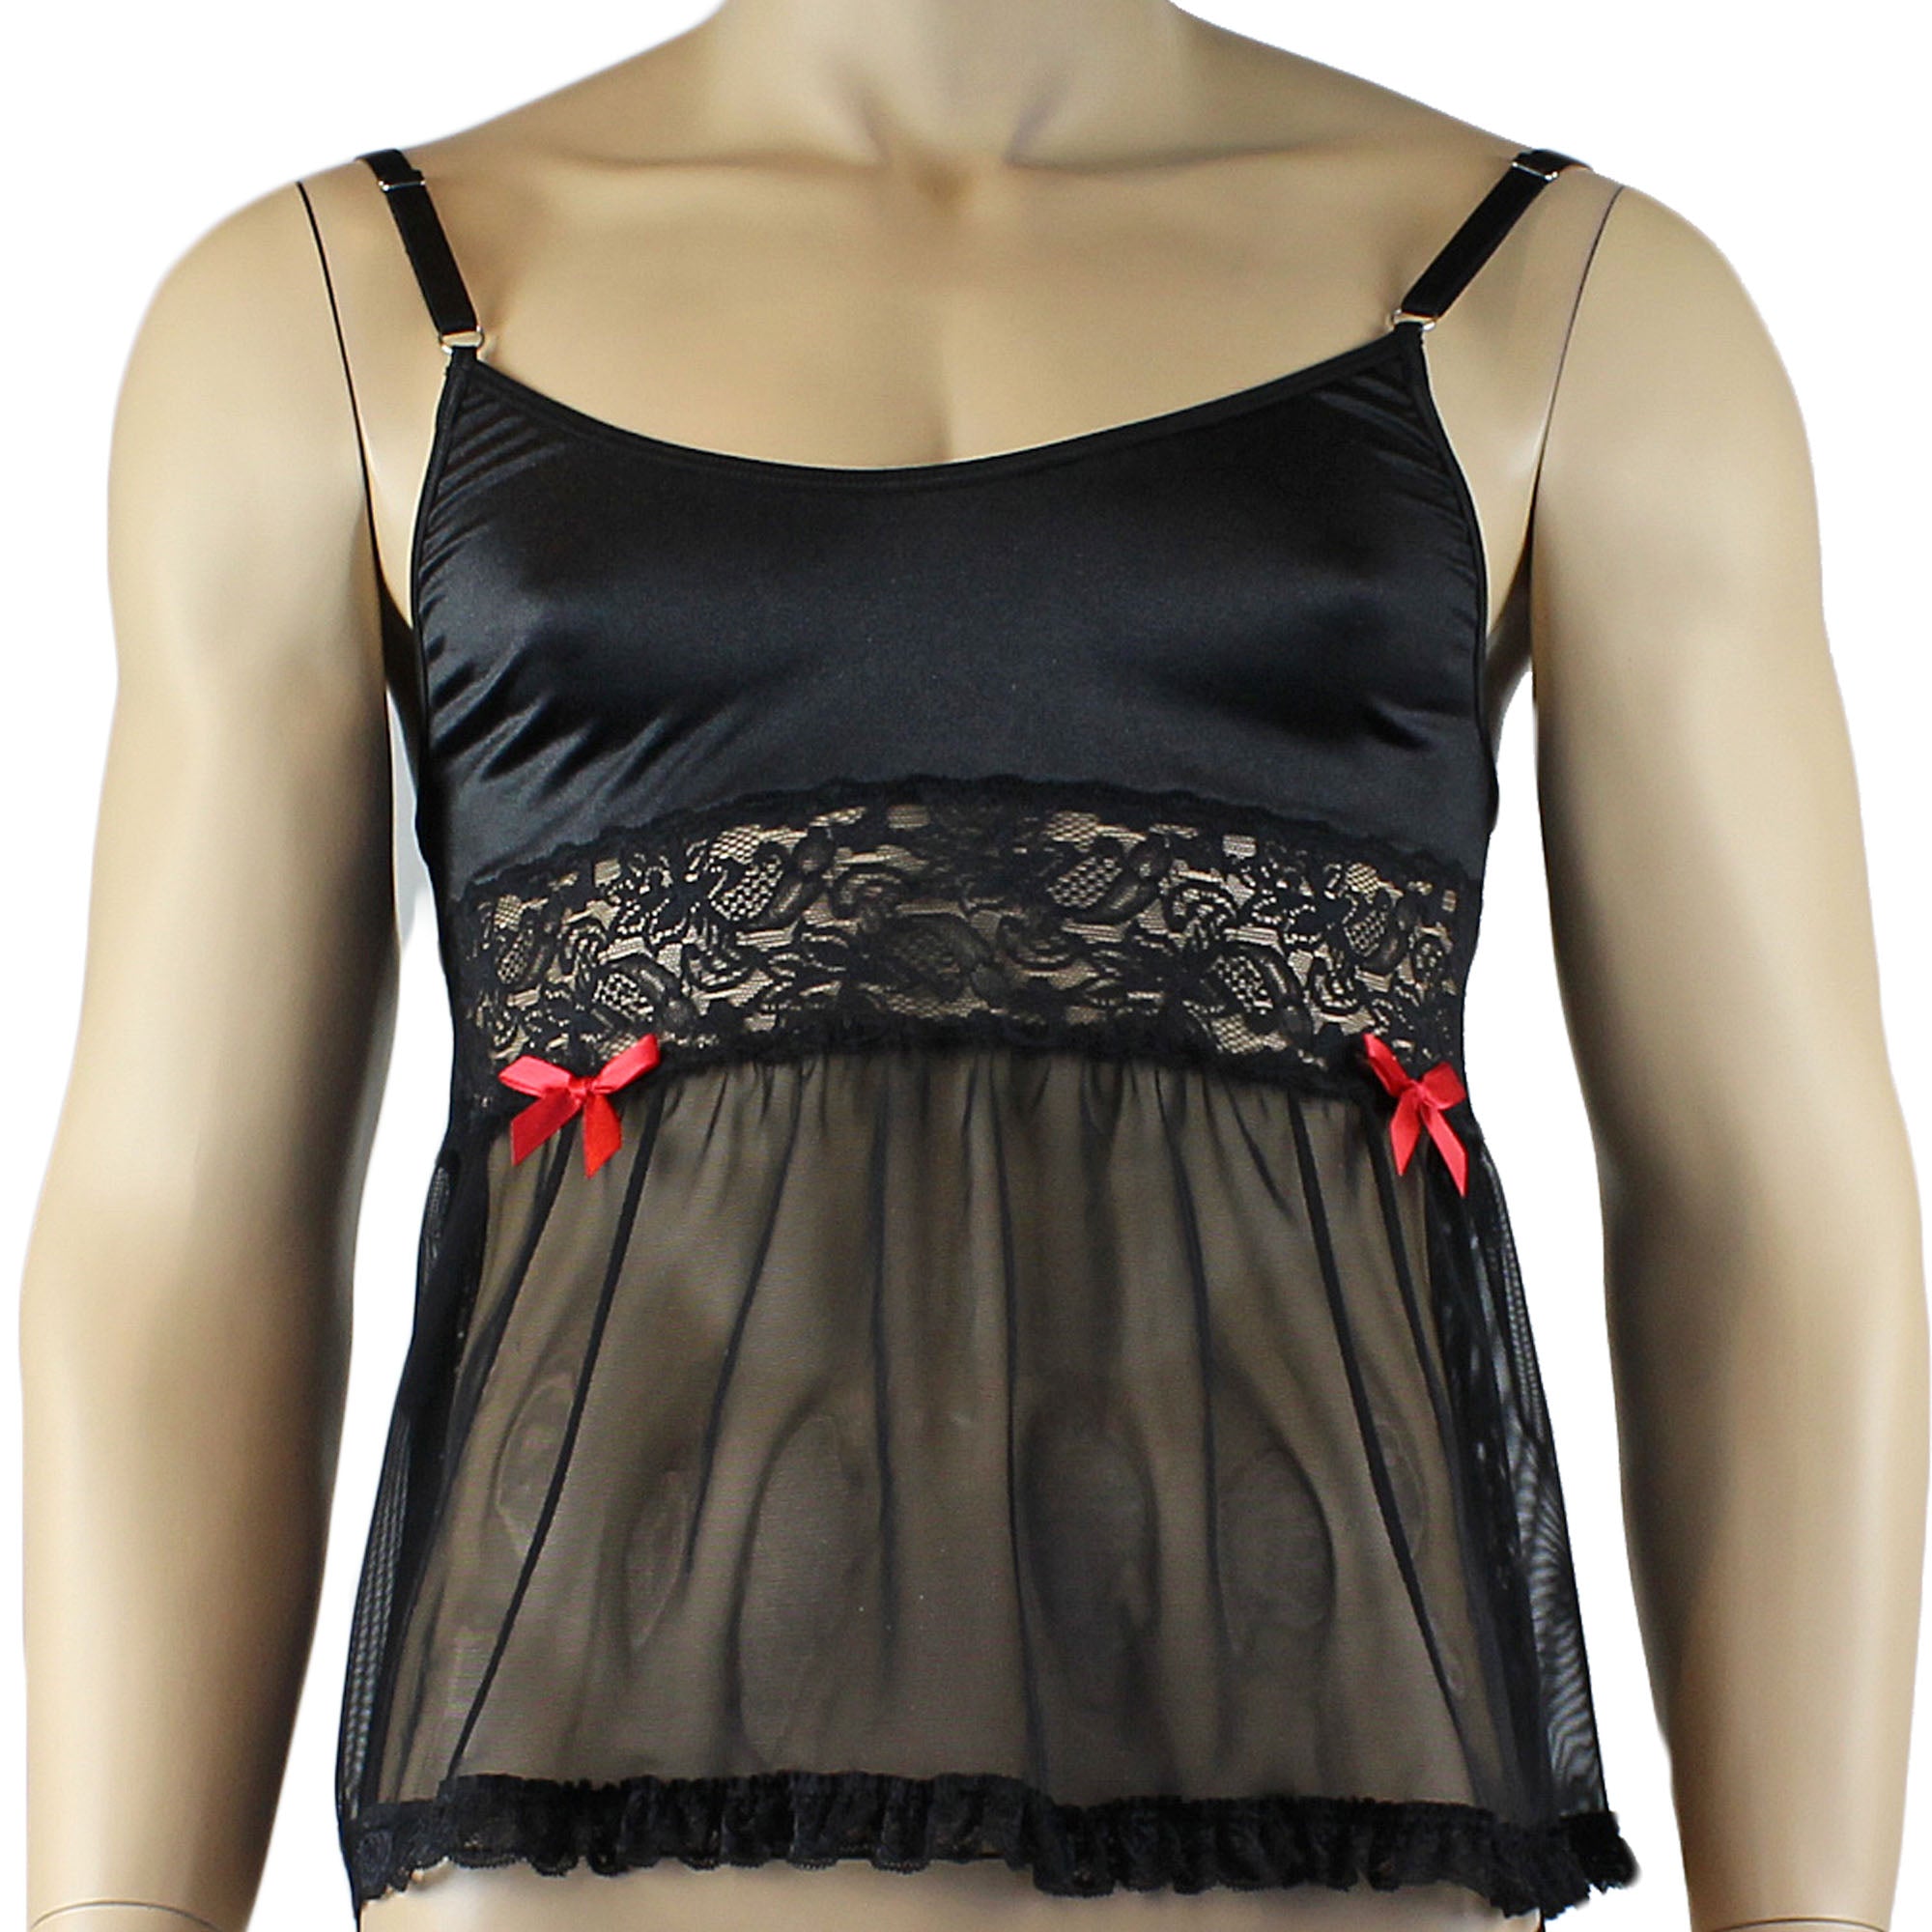 Mens Joanne Mini Babydoll Camisole - Sizes up to 3XL Black & Black Lace